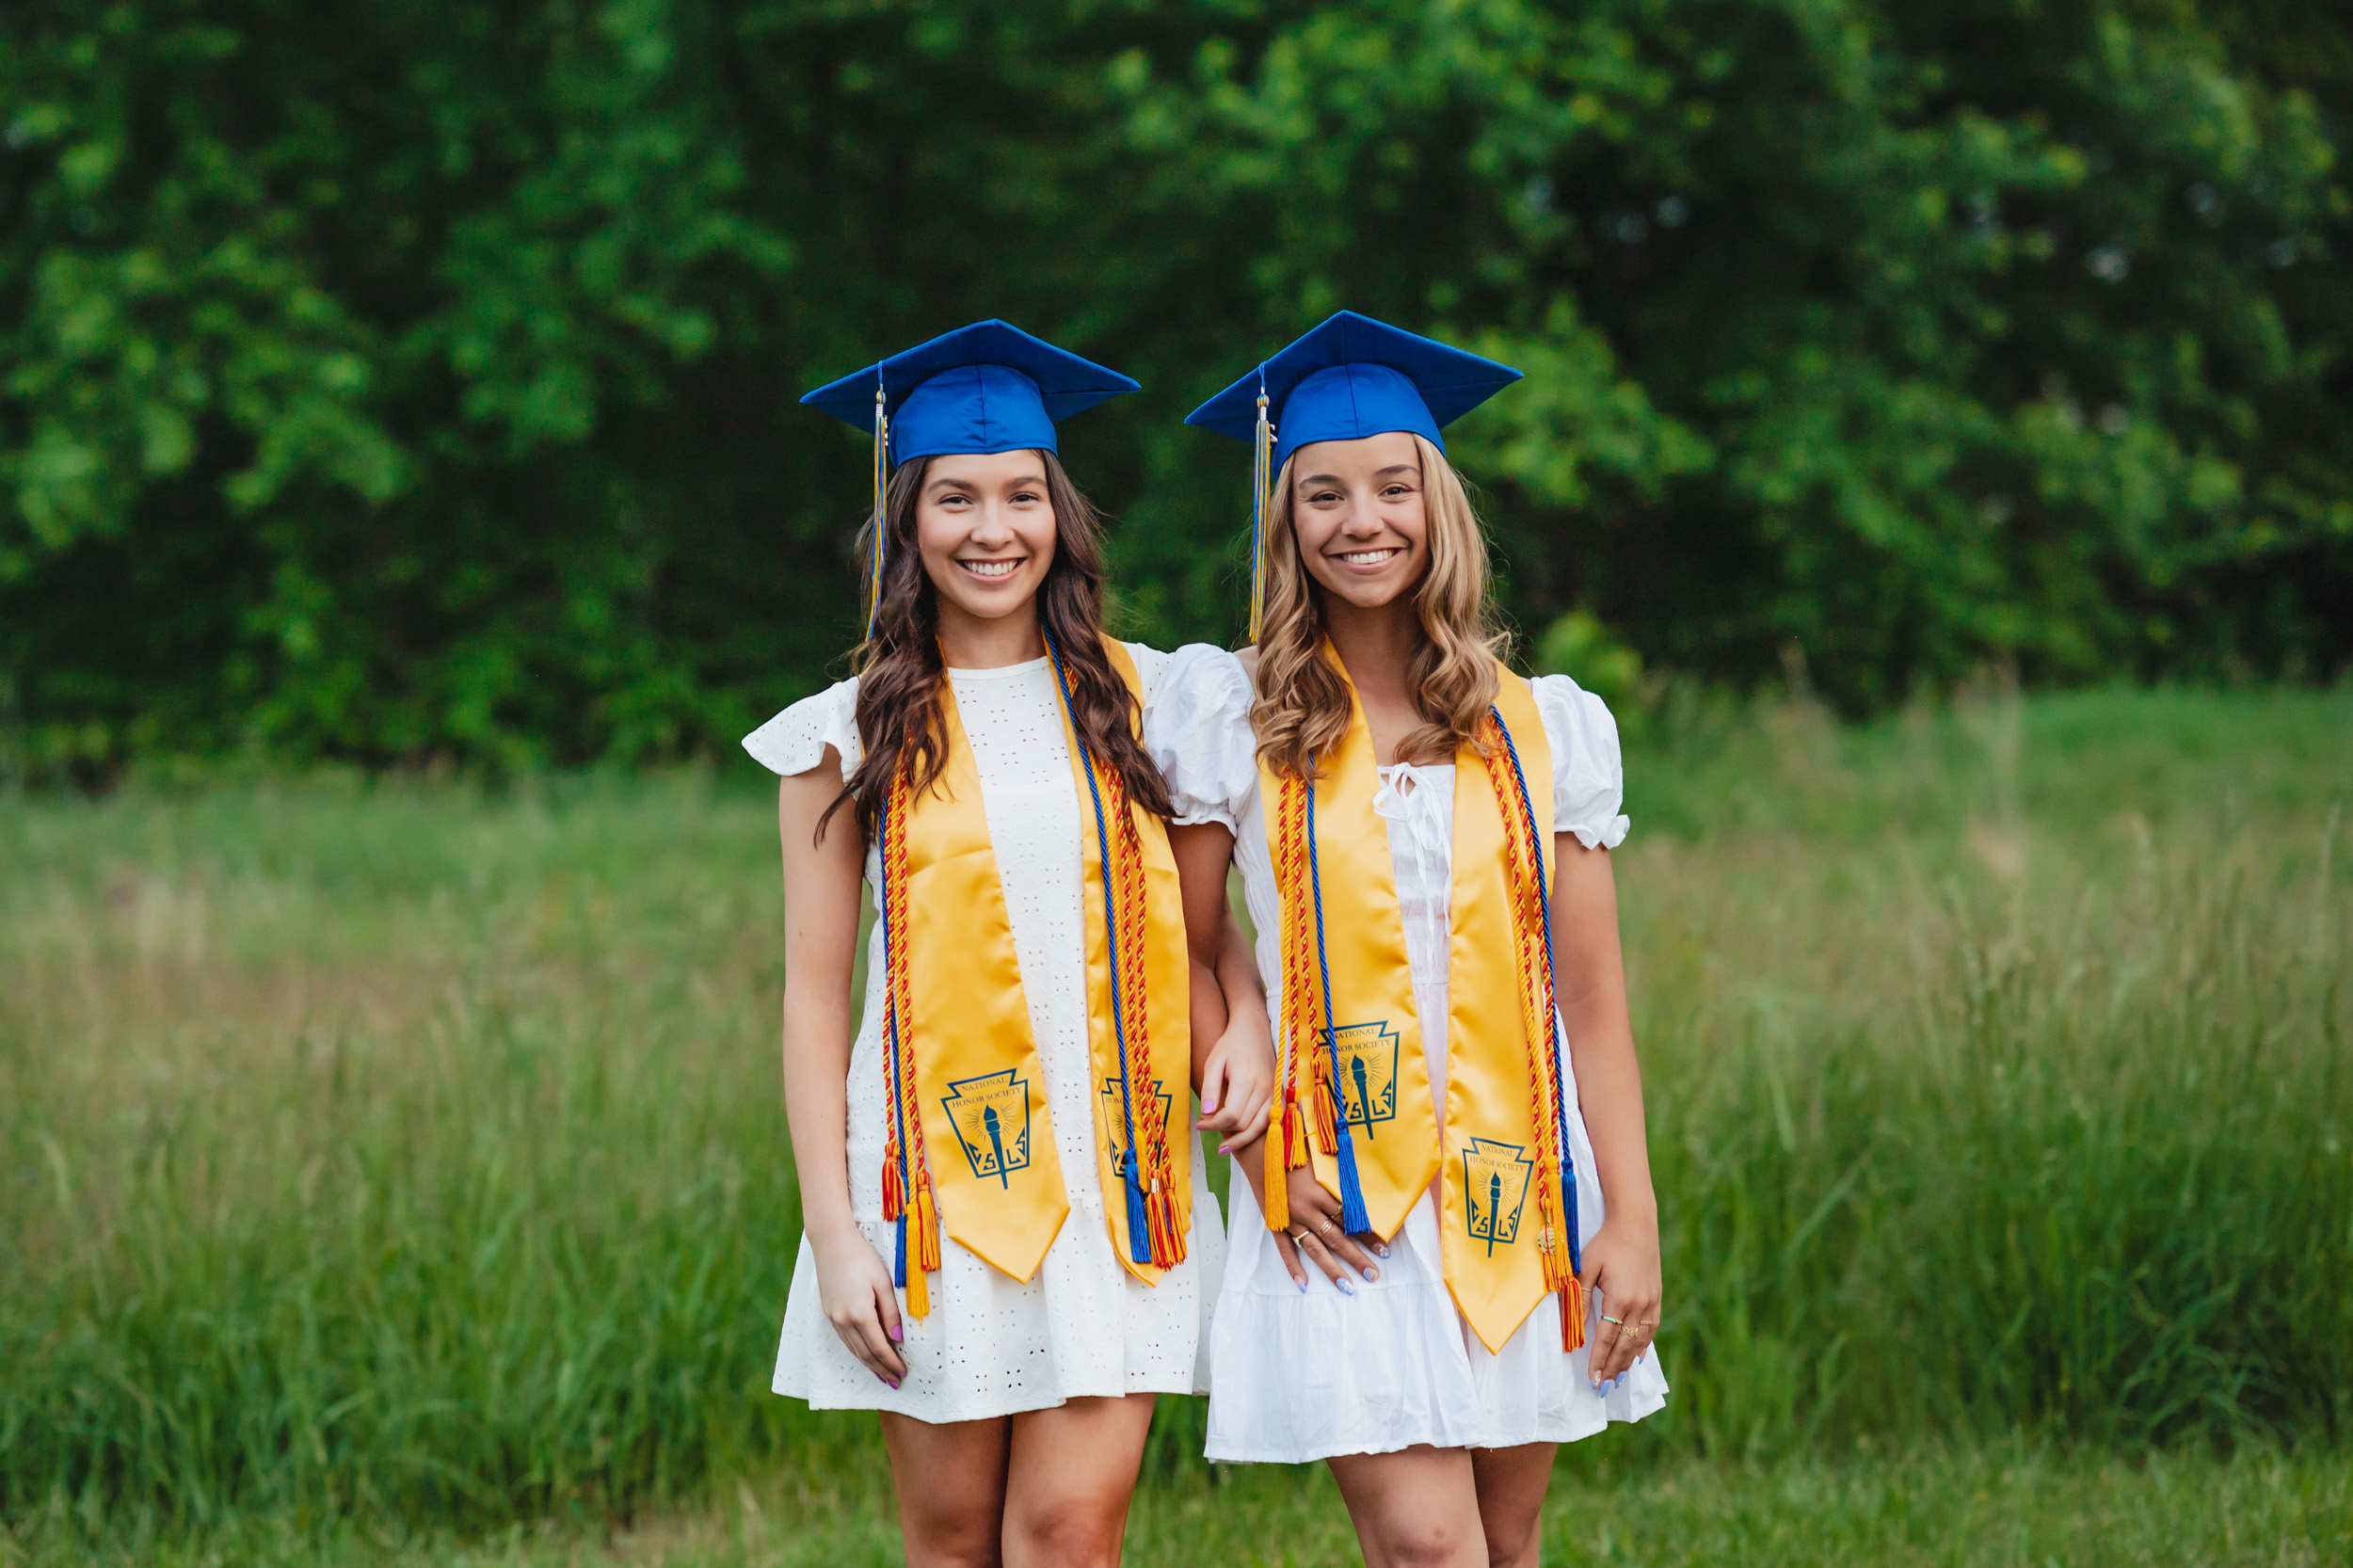 Bff Cap and Gown Session / Graduation Mini / Julie Scheuler Photography